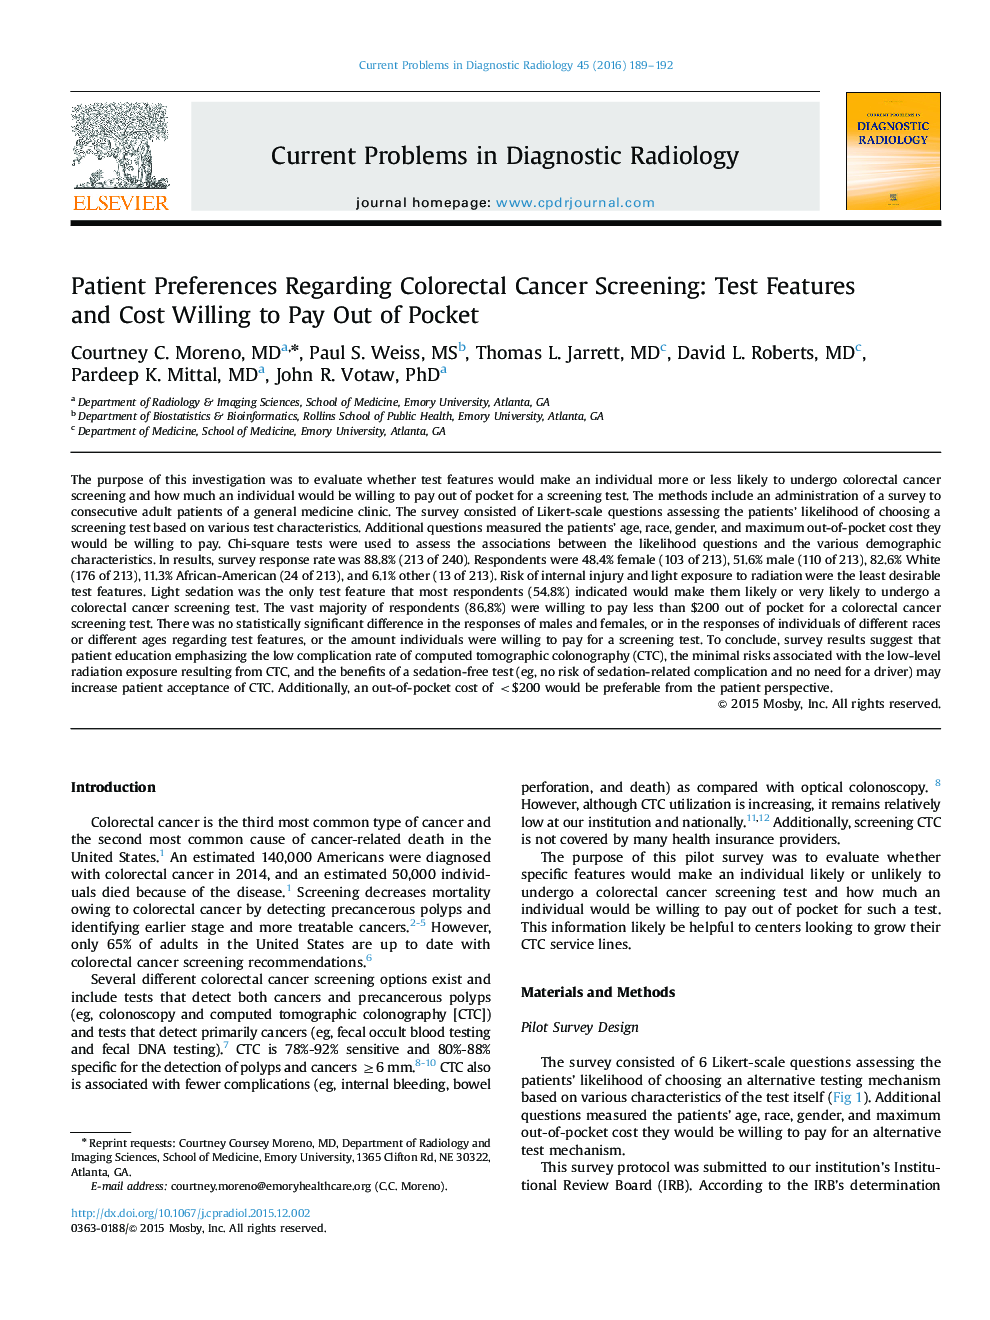 Patient Preferences Regarding Colorectal Cancer Screening: Test Features and Cost Willing to Pay Out of Pocket